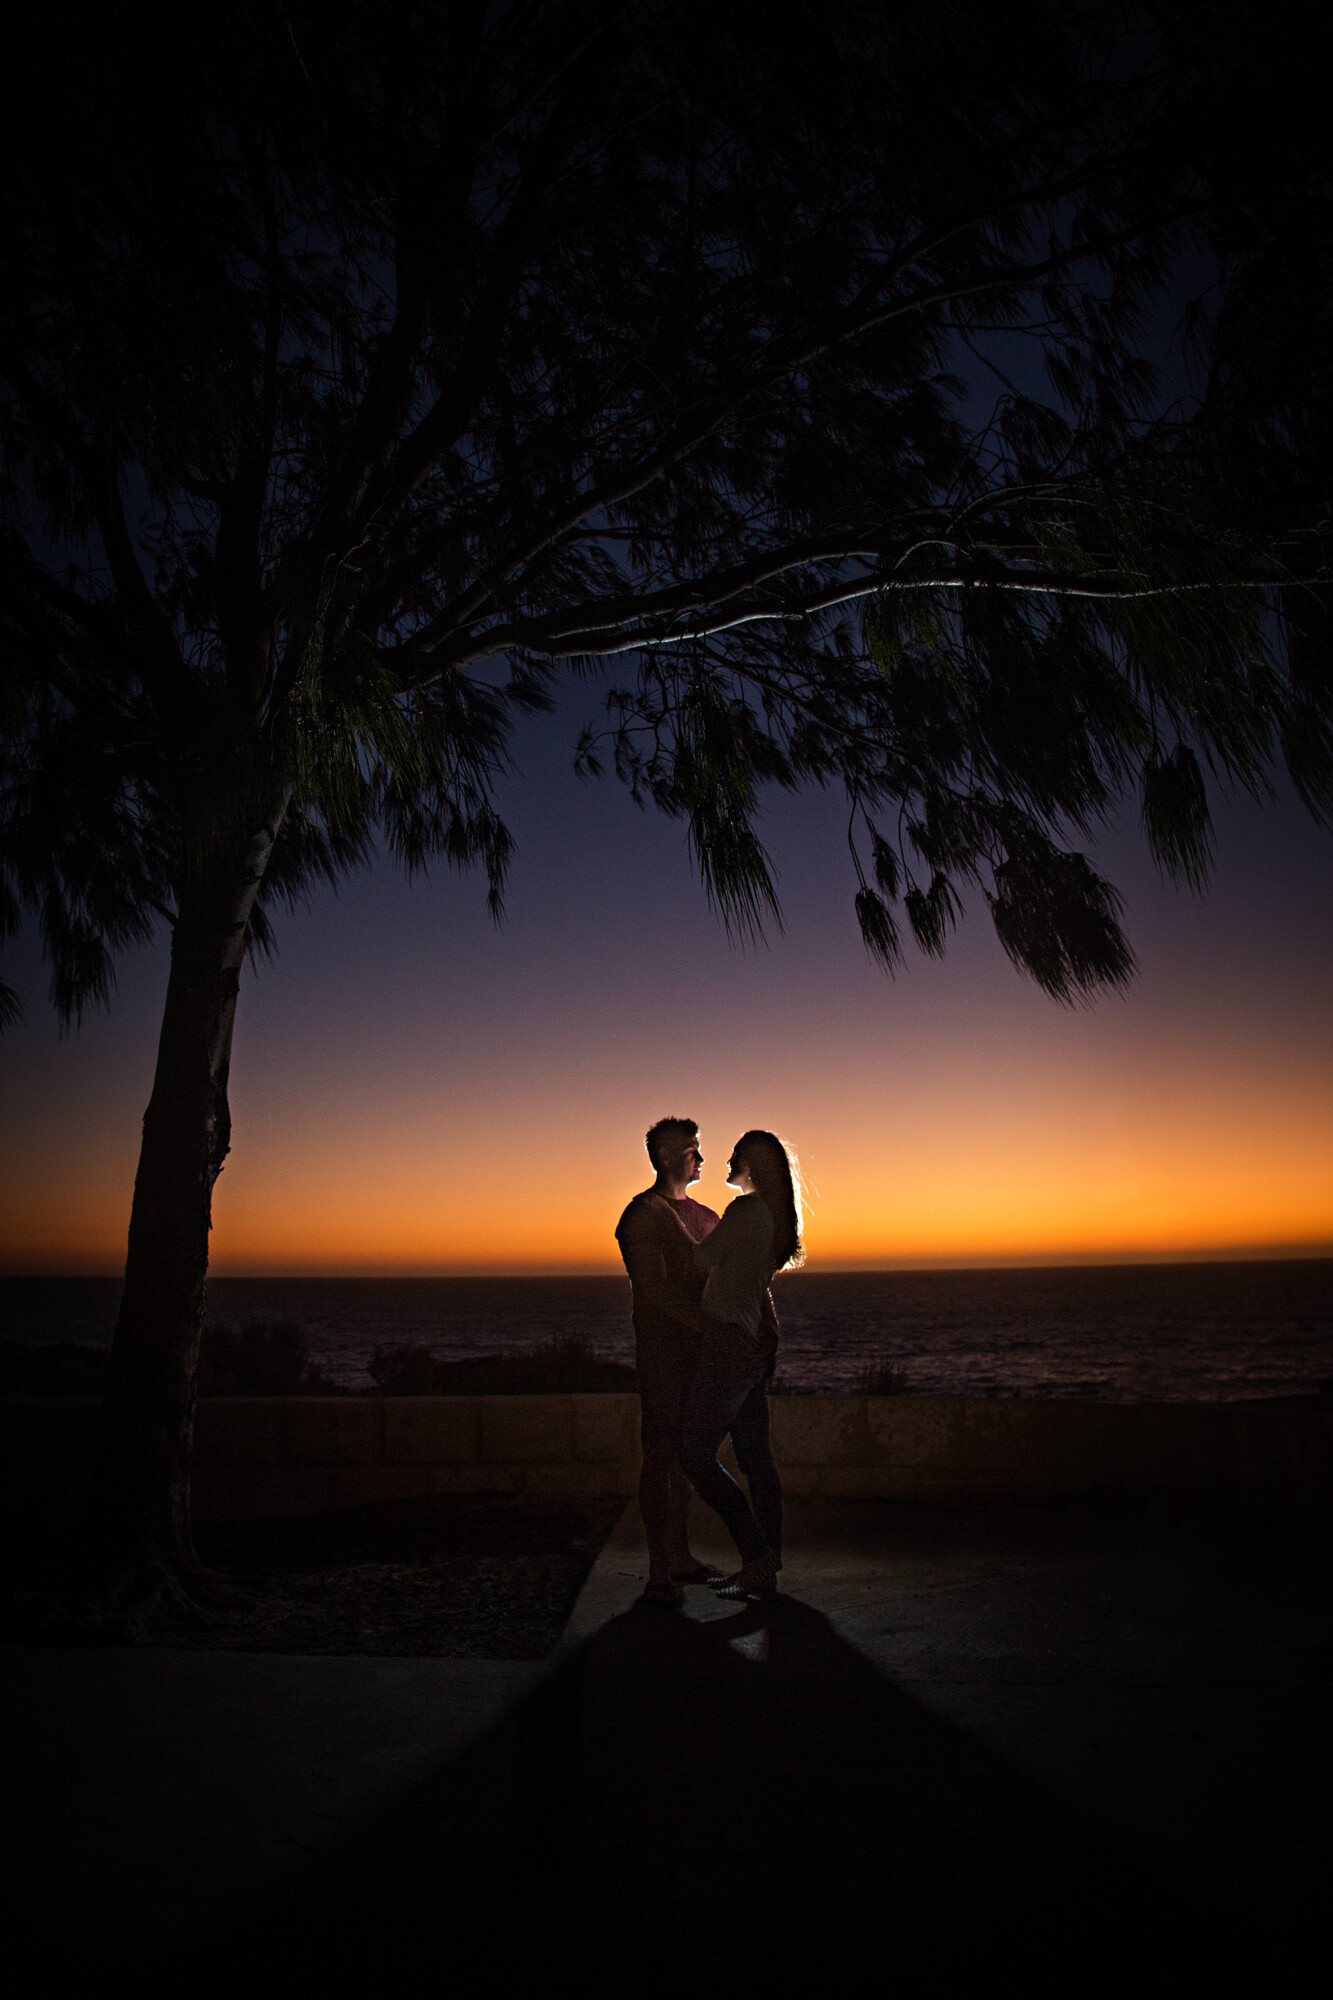 We were photographing Sarah + Mark for their pre wedding photo shoot. They asked if we could head to their favourite beach. It was a gorgeous afternoon, but the sky was pristine clear. Our couple were hoping for some clouds and a beautiful sunset. The sunset wasn’t too special so after a couple of shots we headed back to the car park. When we turned around there was an amazing glow in the sky, we quickly set up a couple of flashes on the ground behind our couple for some backlighting, had them stand under a little tree and captured this image. Our couple were so happy with this last shot we captured - and, so were we!